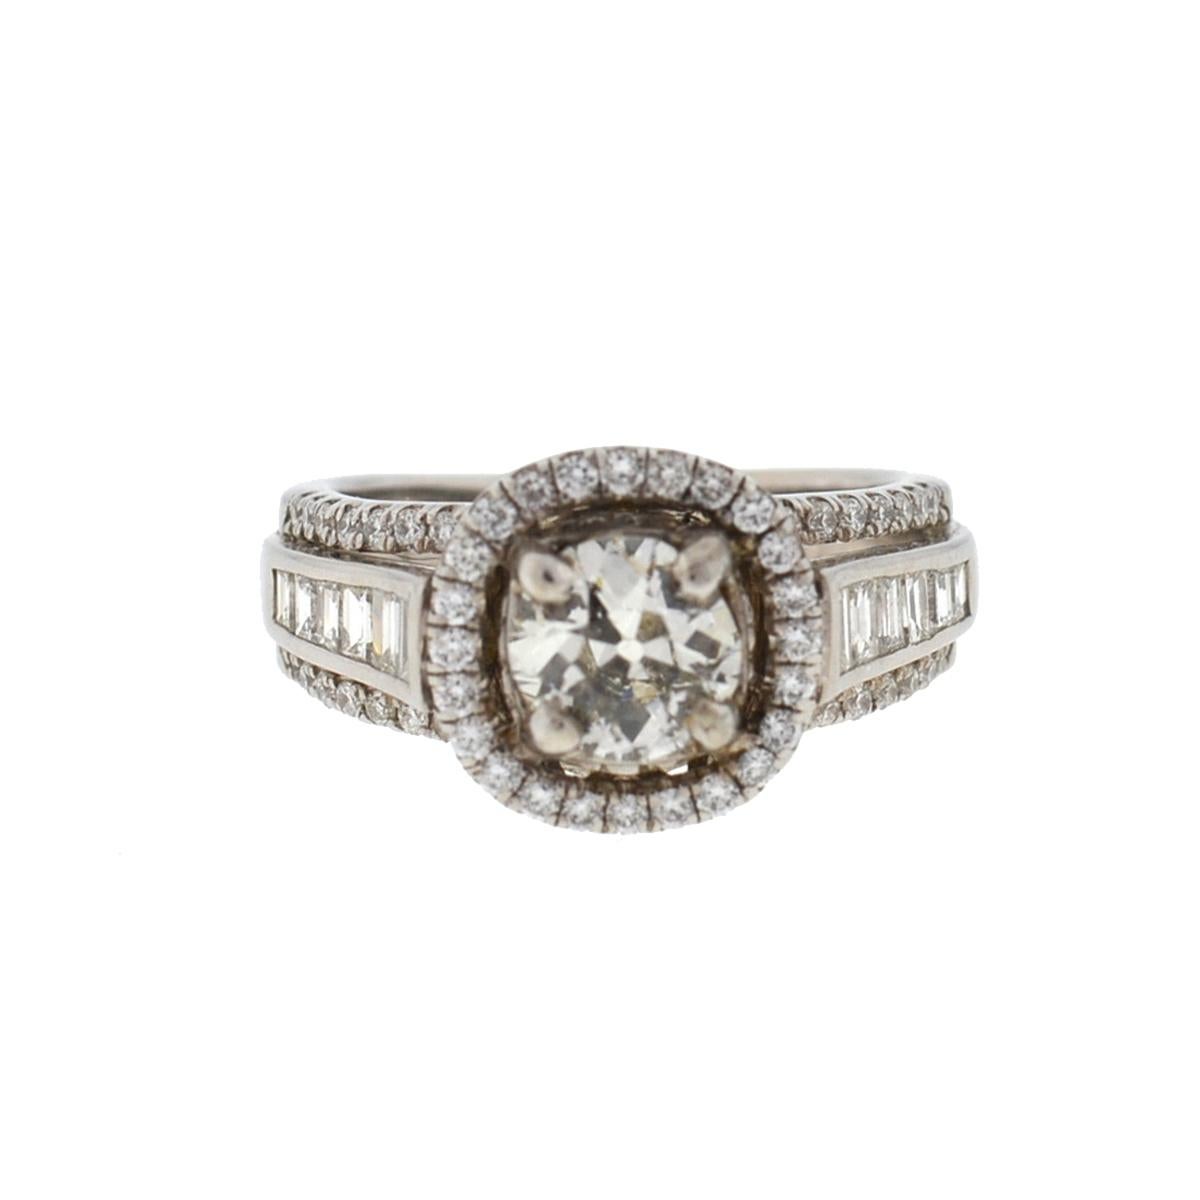 
Company-N/A
Style-Ladies Diamond Engagement Ring
Metal-18k White Gold 
Size-4.75
Weight -6.2 grams
Stones-Diamonds ( approx. 1.55 Cts TW)/ Main Stone .96 Cts ( European cut)
INCLUDES -Ring ONLY 
SKU-8046-1TEEE